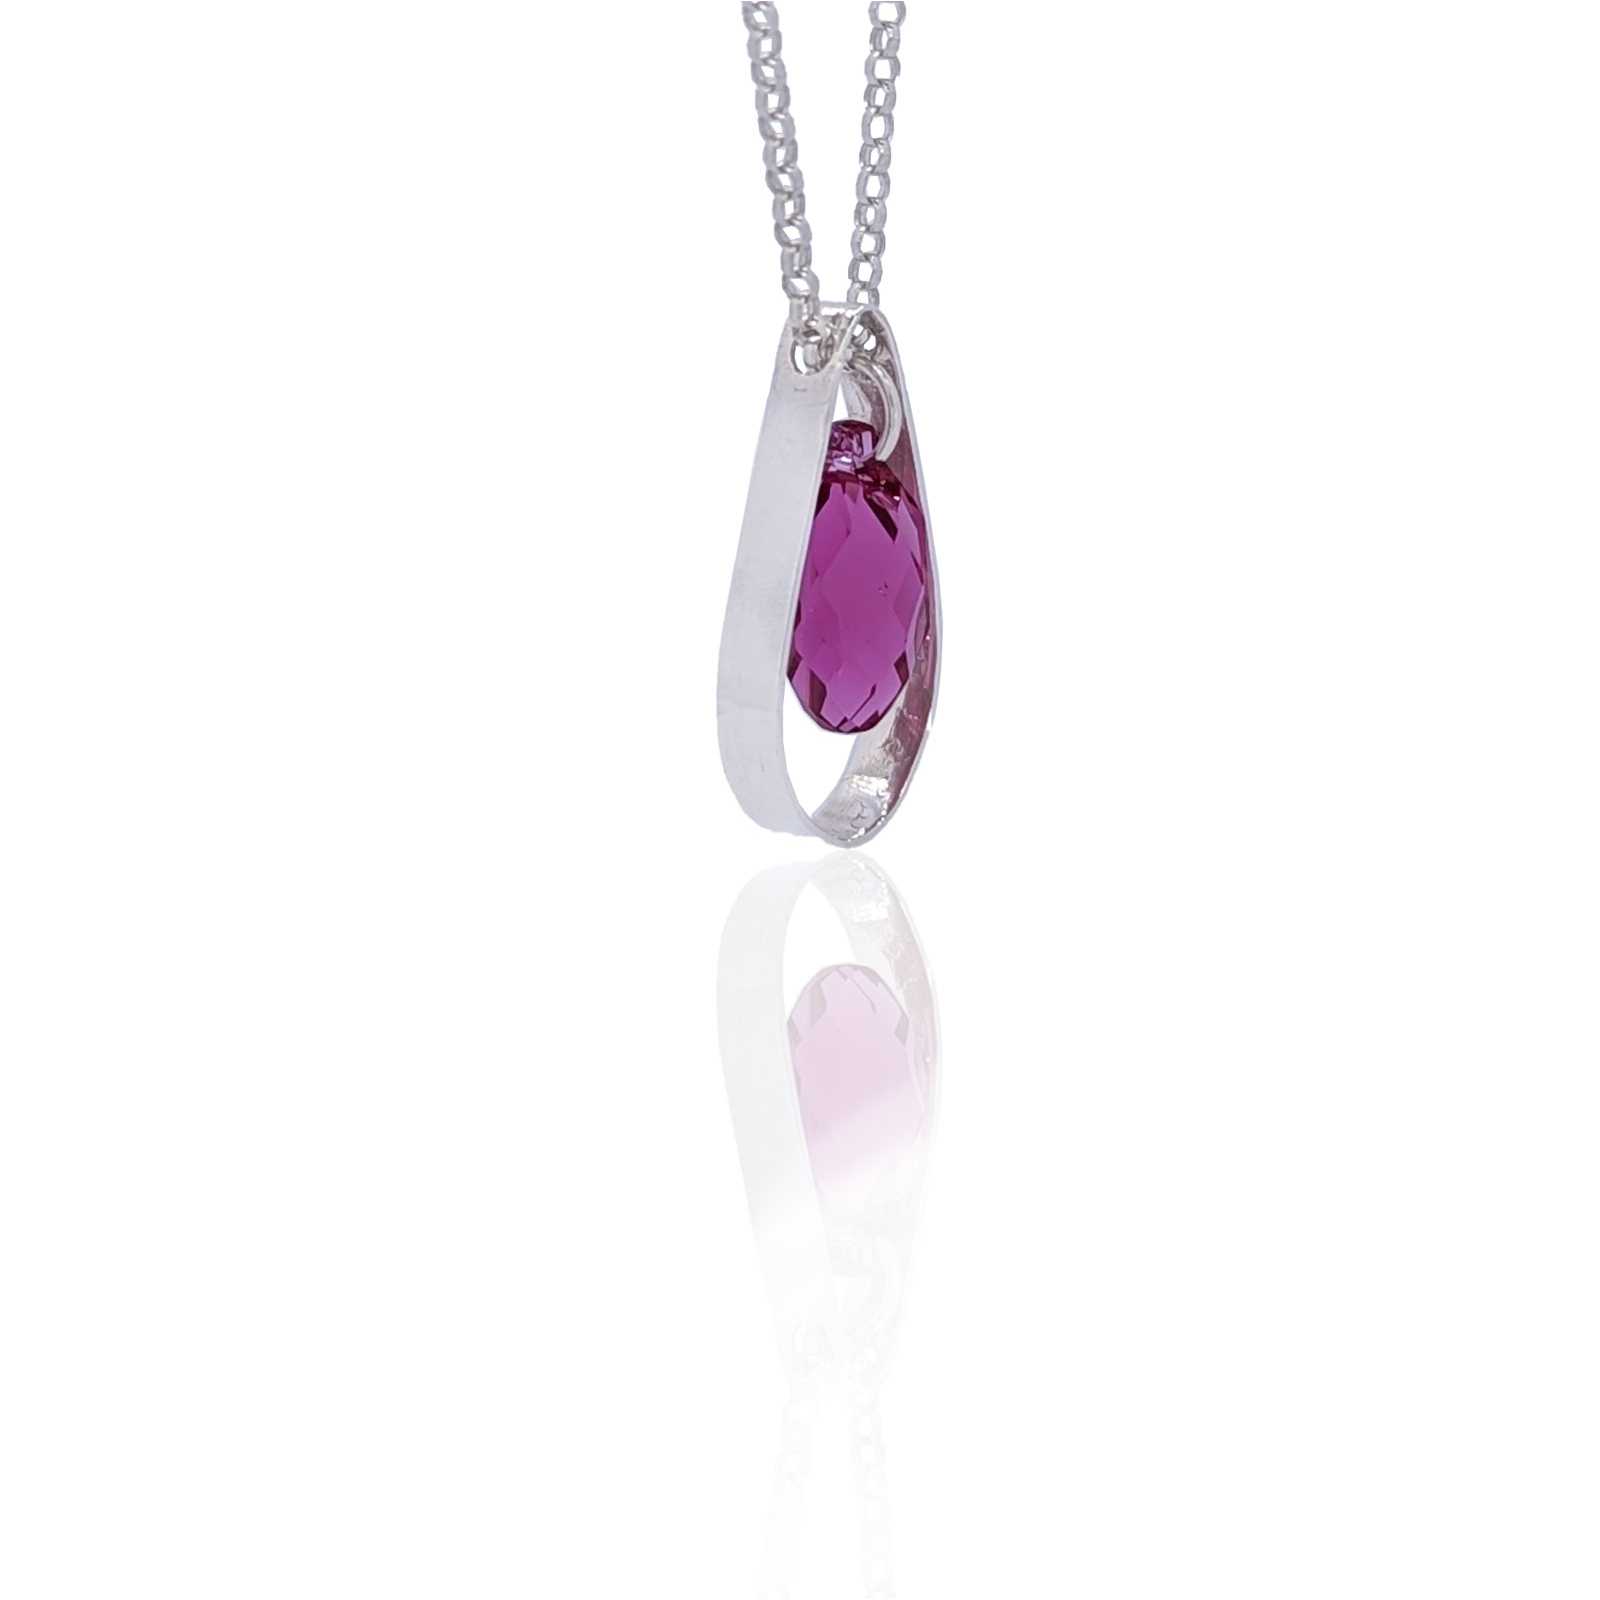 Teardrop crystal & silver necklace| Mali's Canadian handmade Jewelry 4 equal payments with Klarna
------------------------------